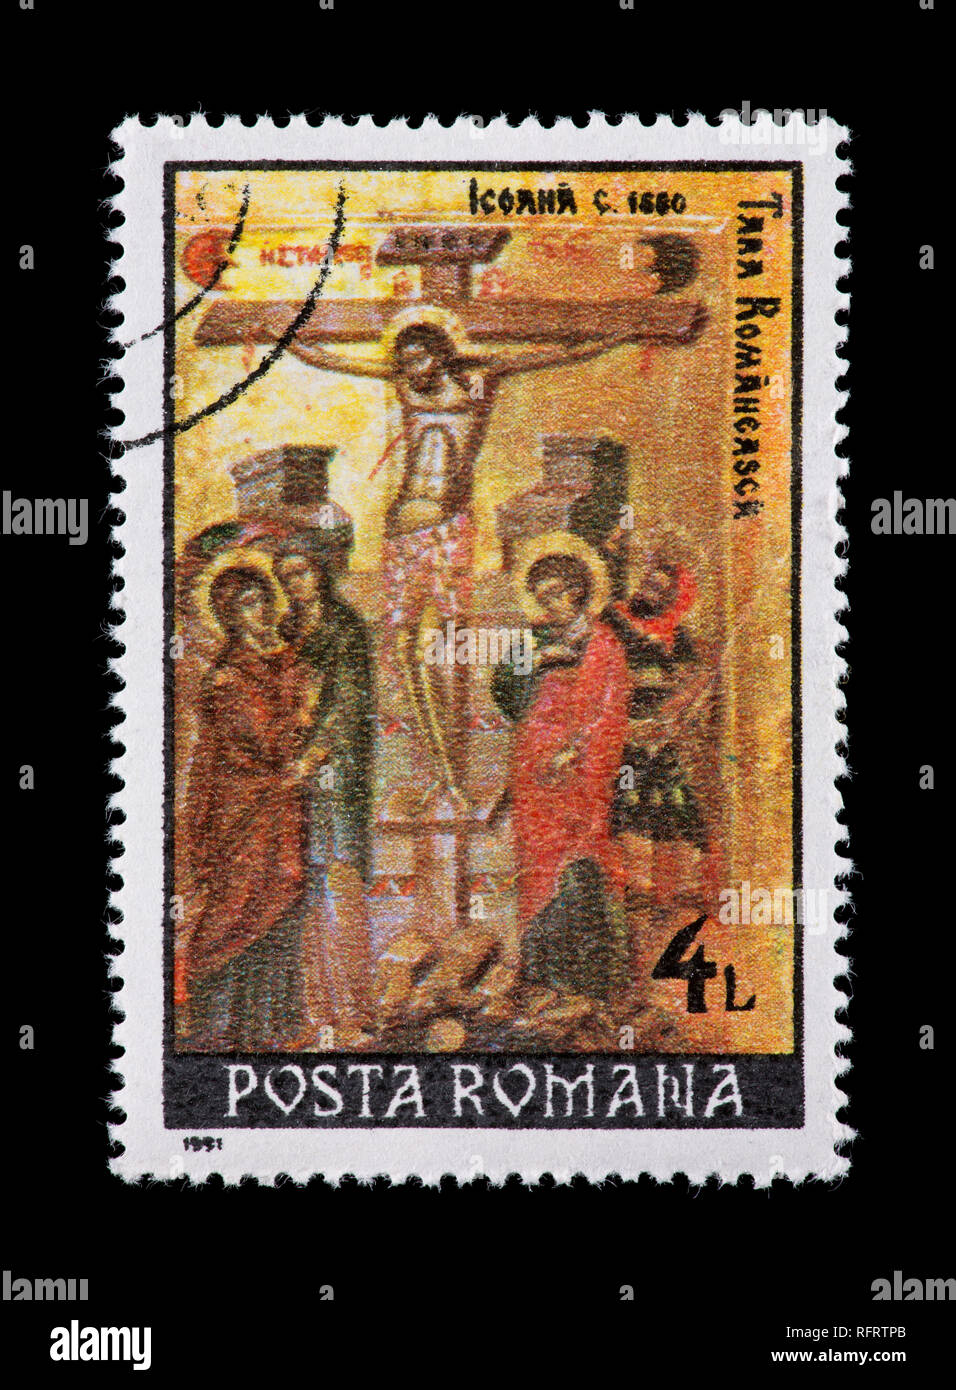 Postage stamp from Romania depicting Jesus, issued for Easter Stock Photo